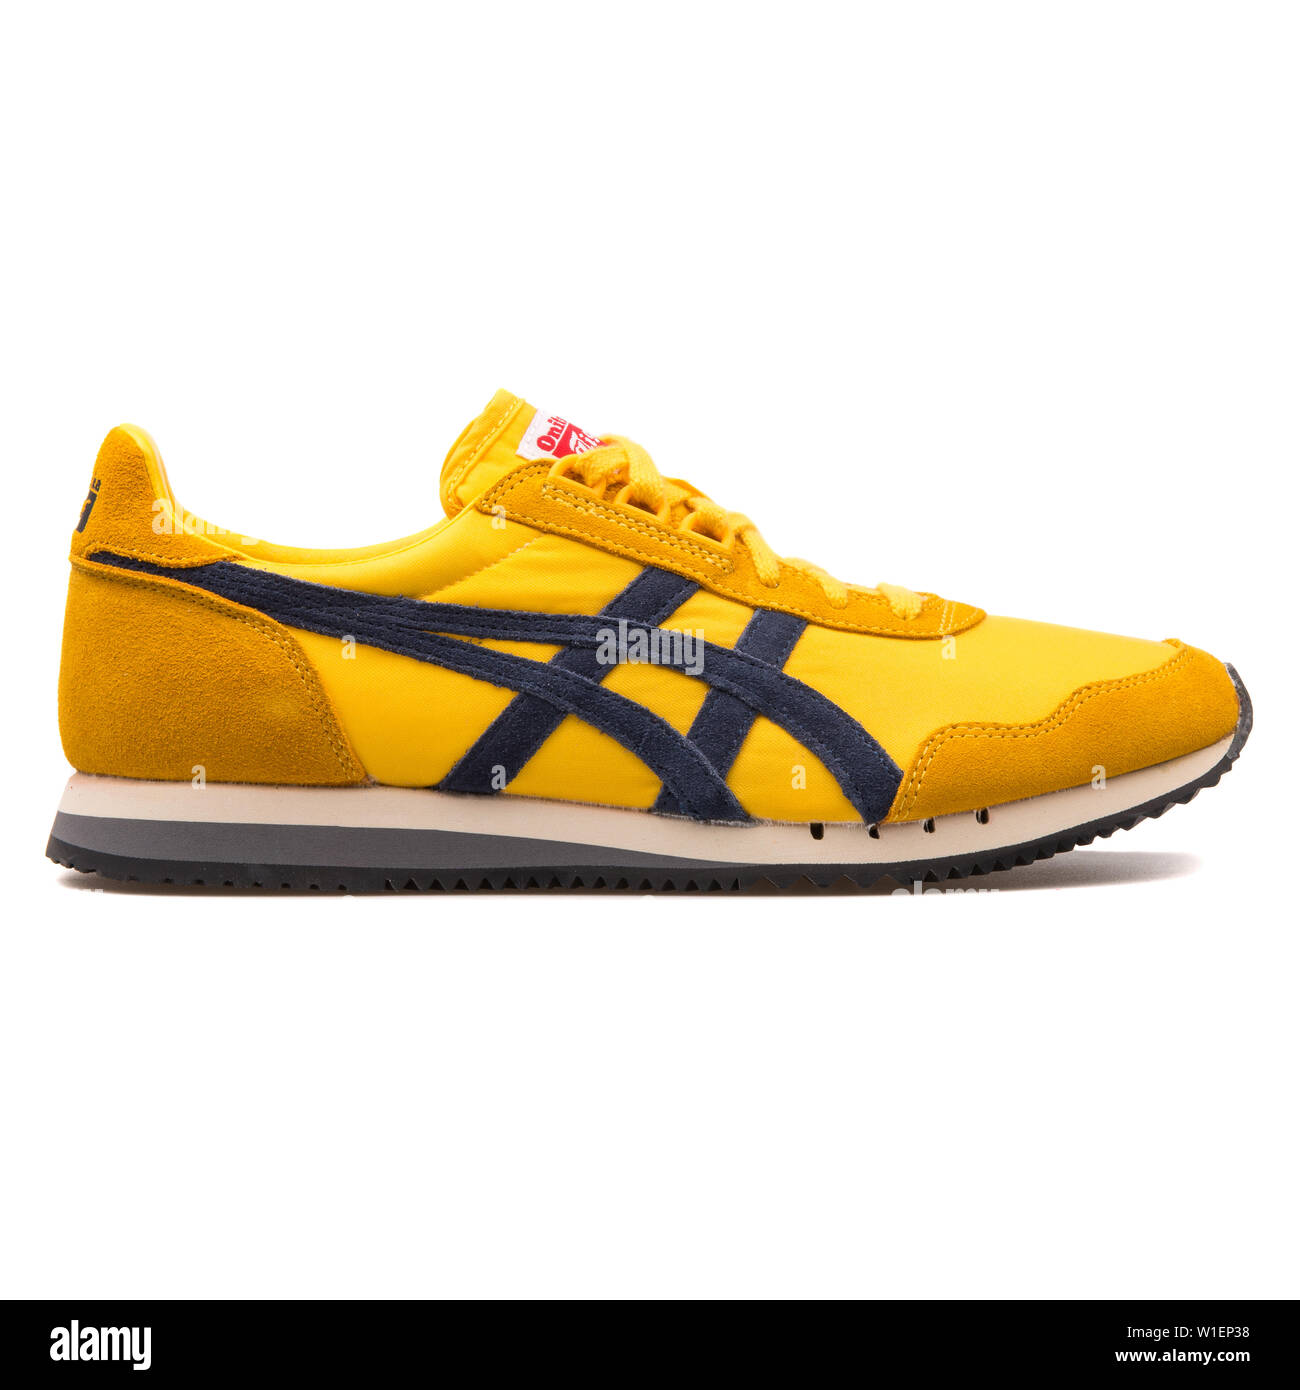 Onitsuka Tiger Dualio yellow and blue 